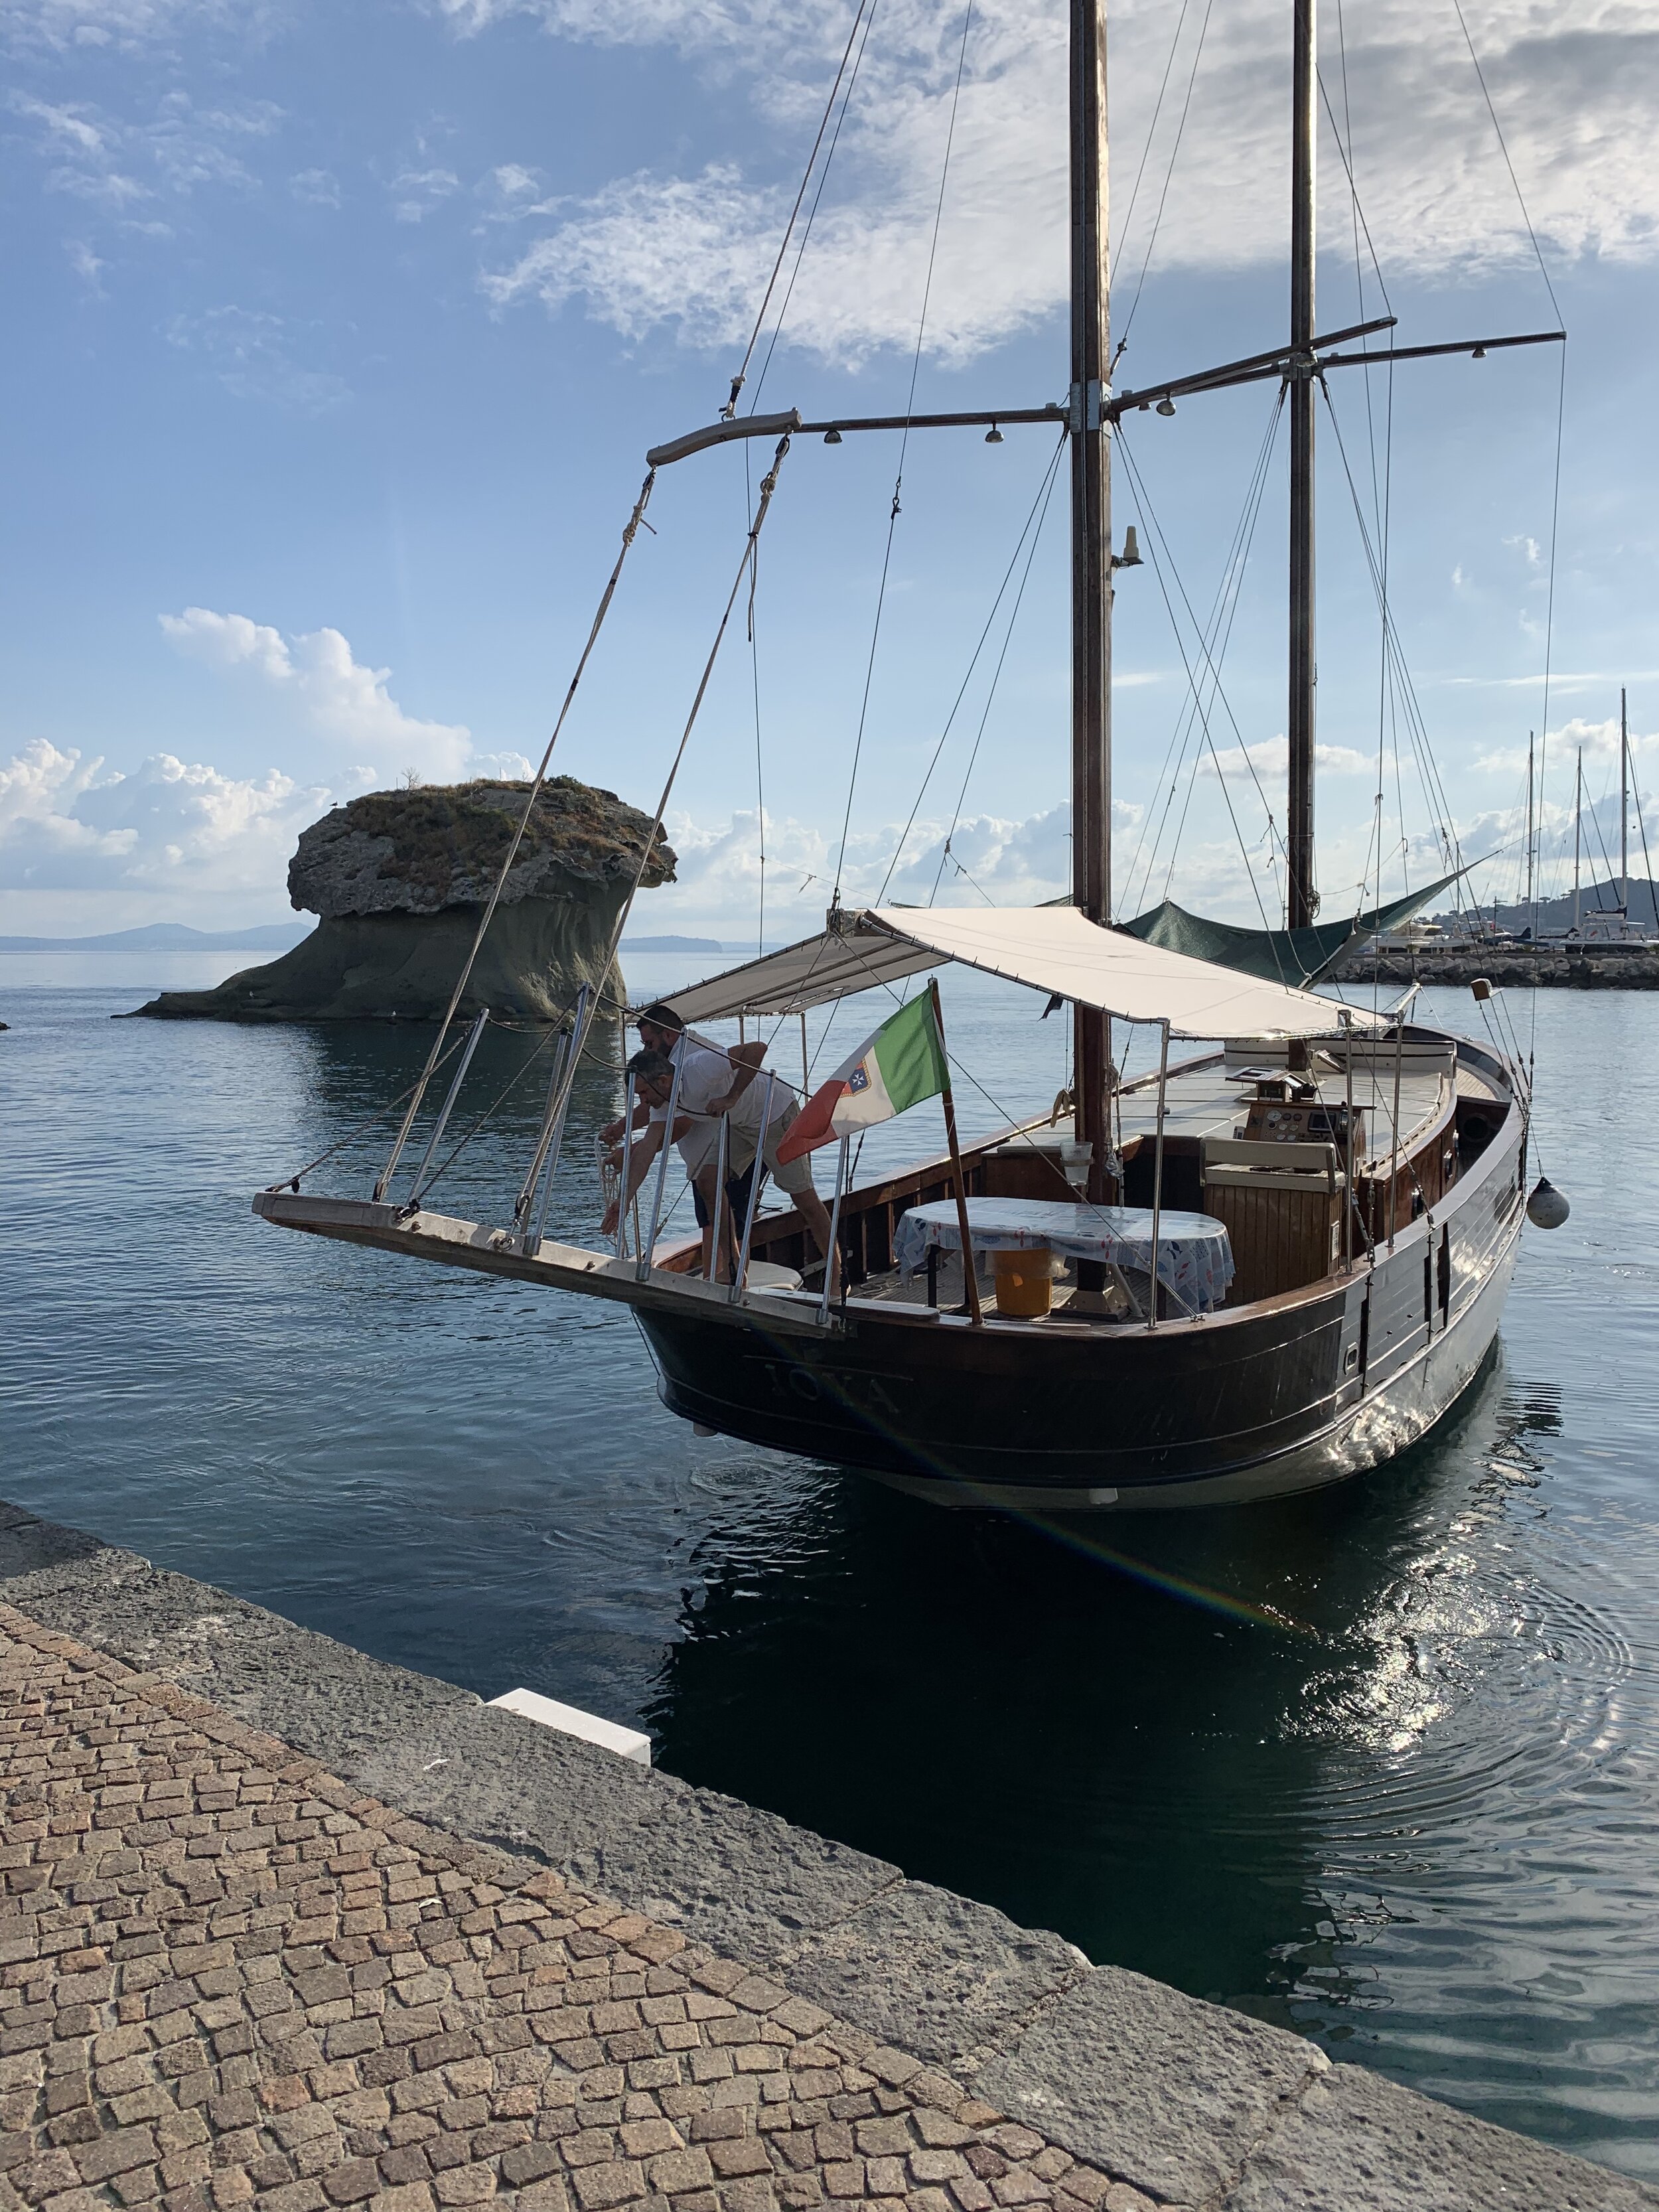 The boat for our day around the island | EAT.PRAY.MOVE Yoga Retreats | Ischia, Italy